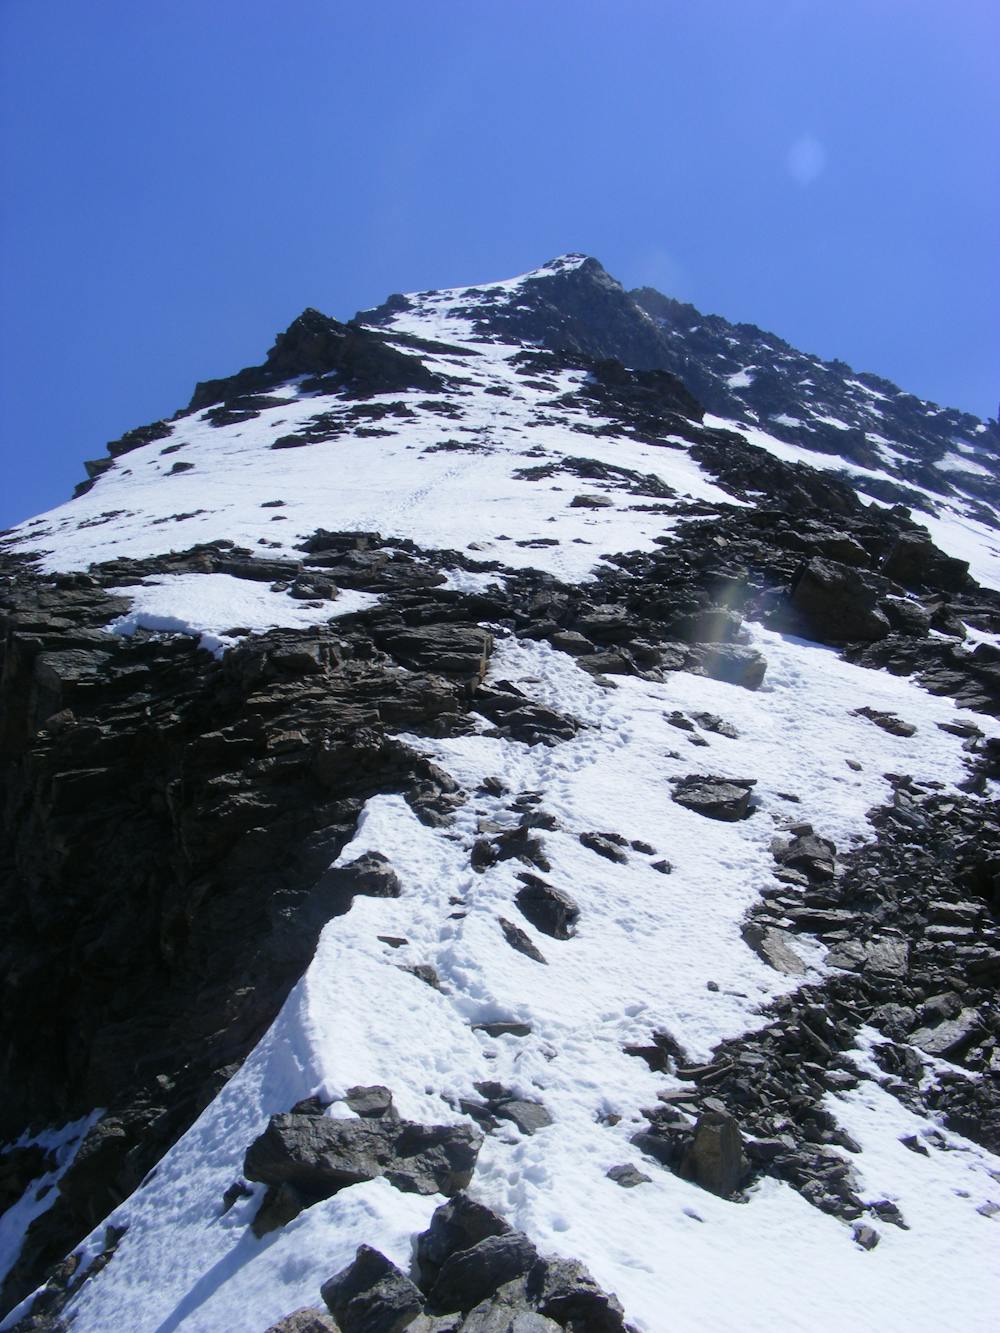 Looking up the top section of the route